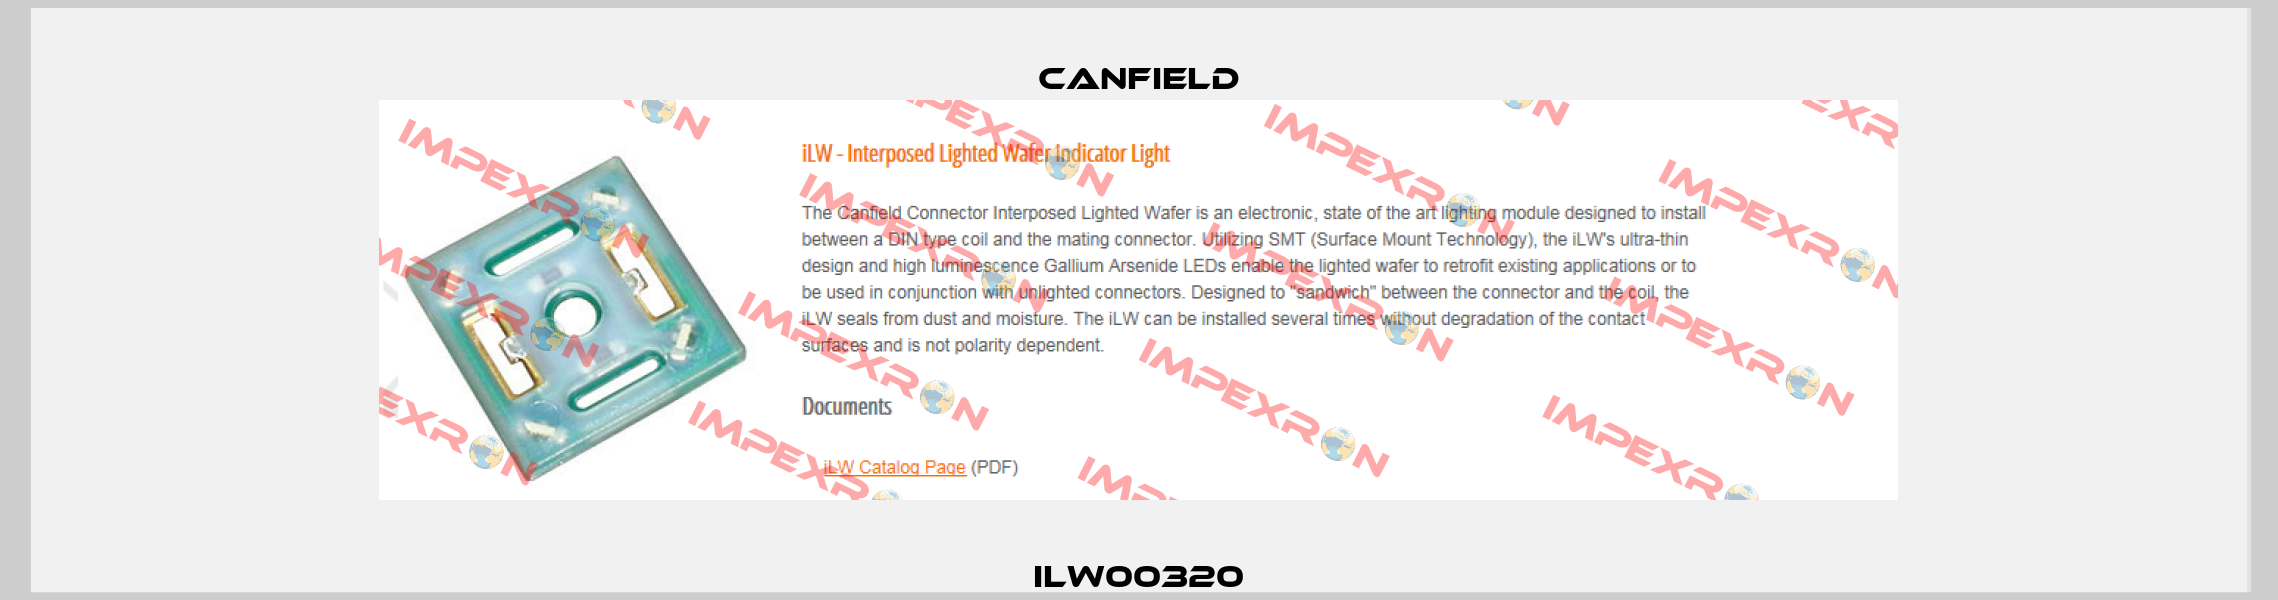 ILW00320 Canfield